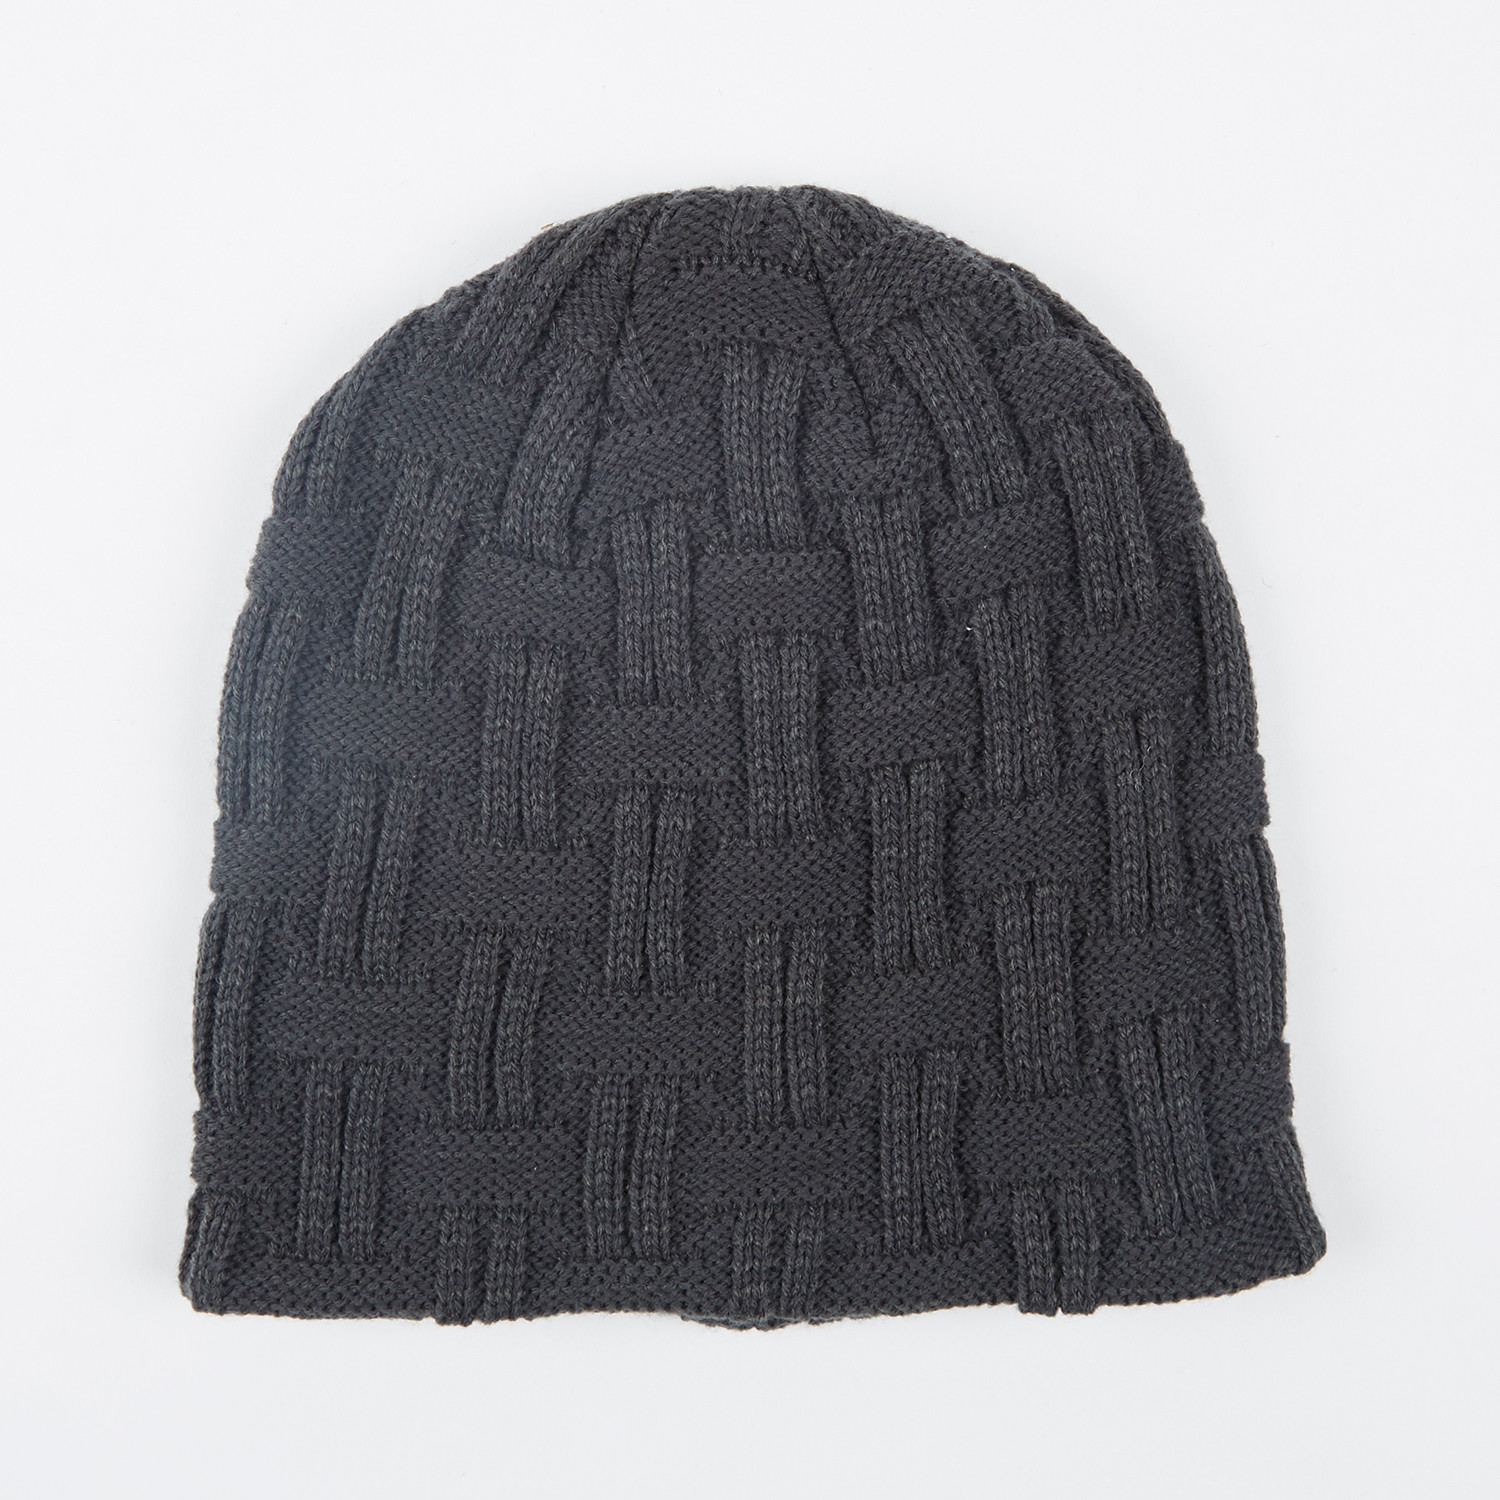 Basket Weave Beanie // Charcoal - FITS - Touch of Modern